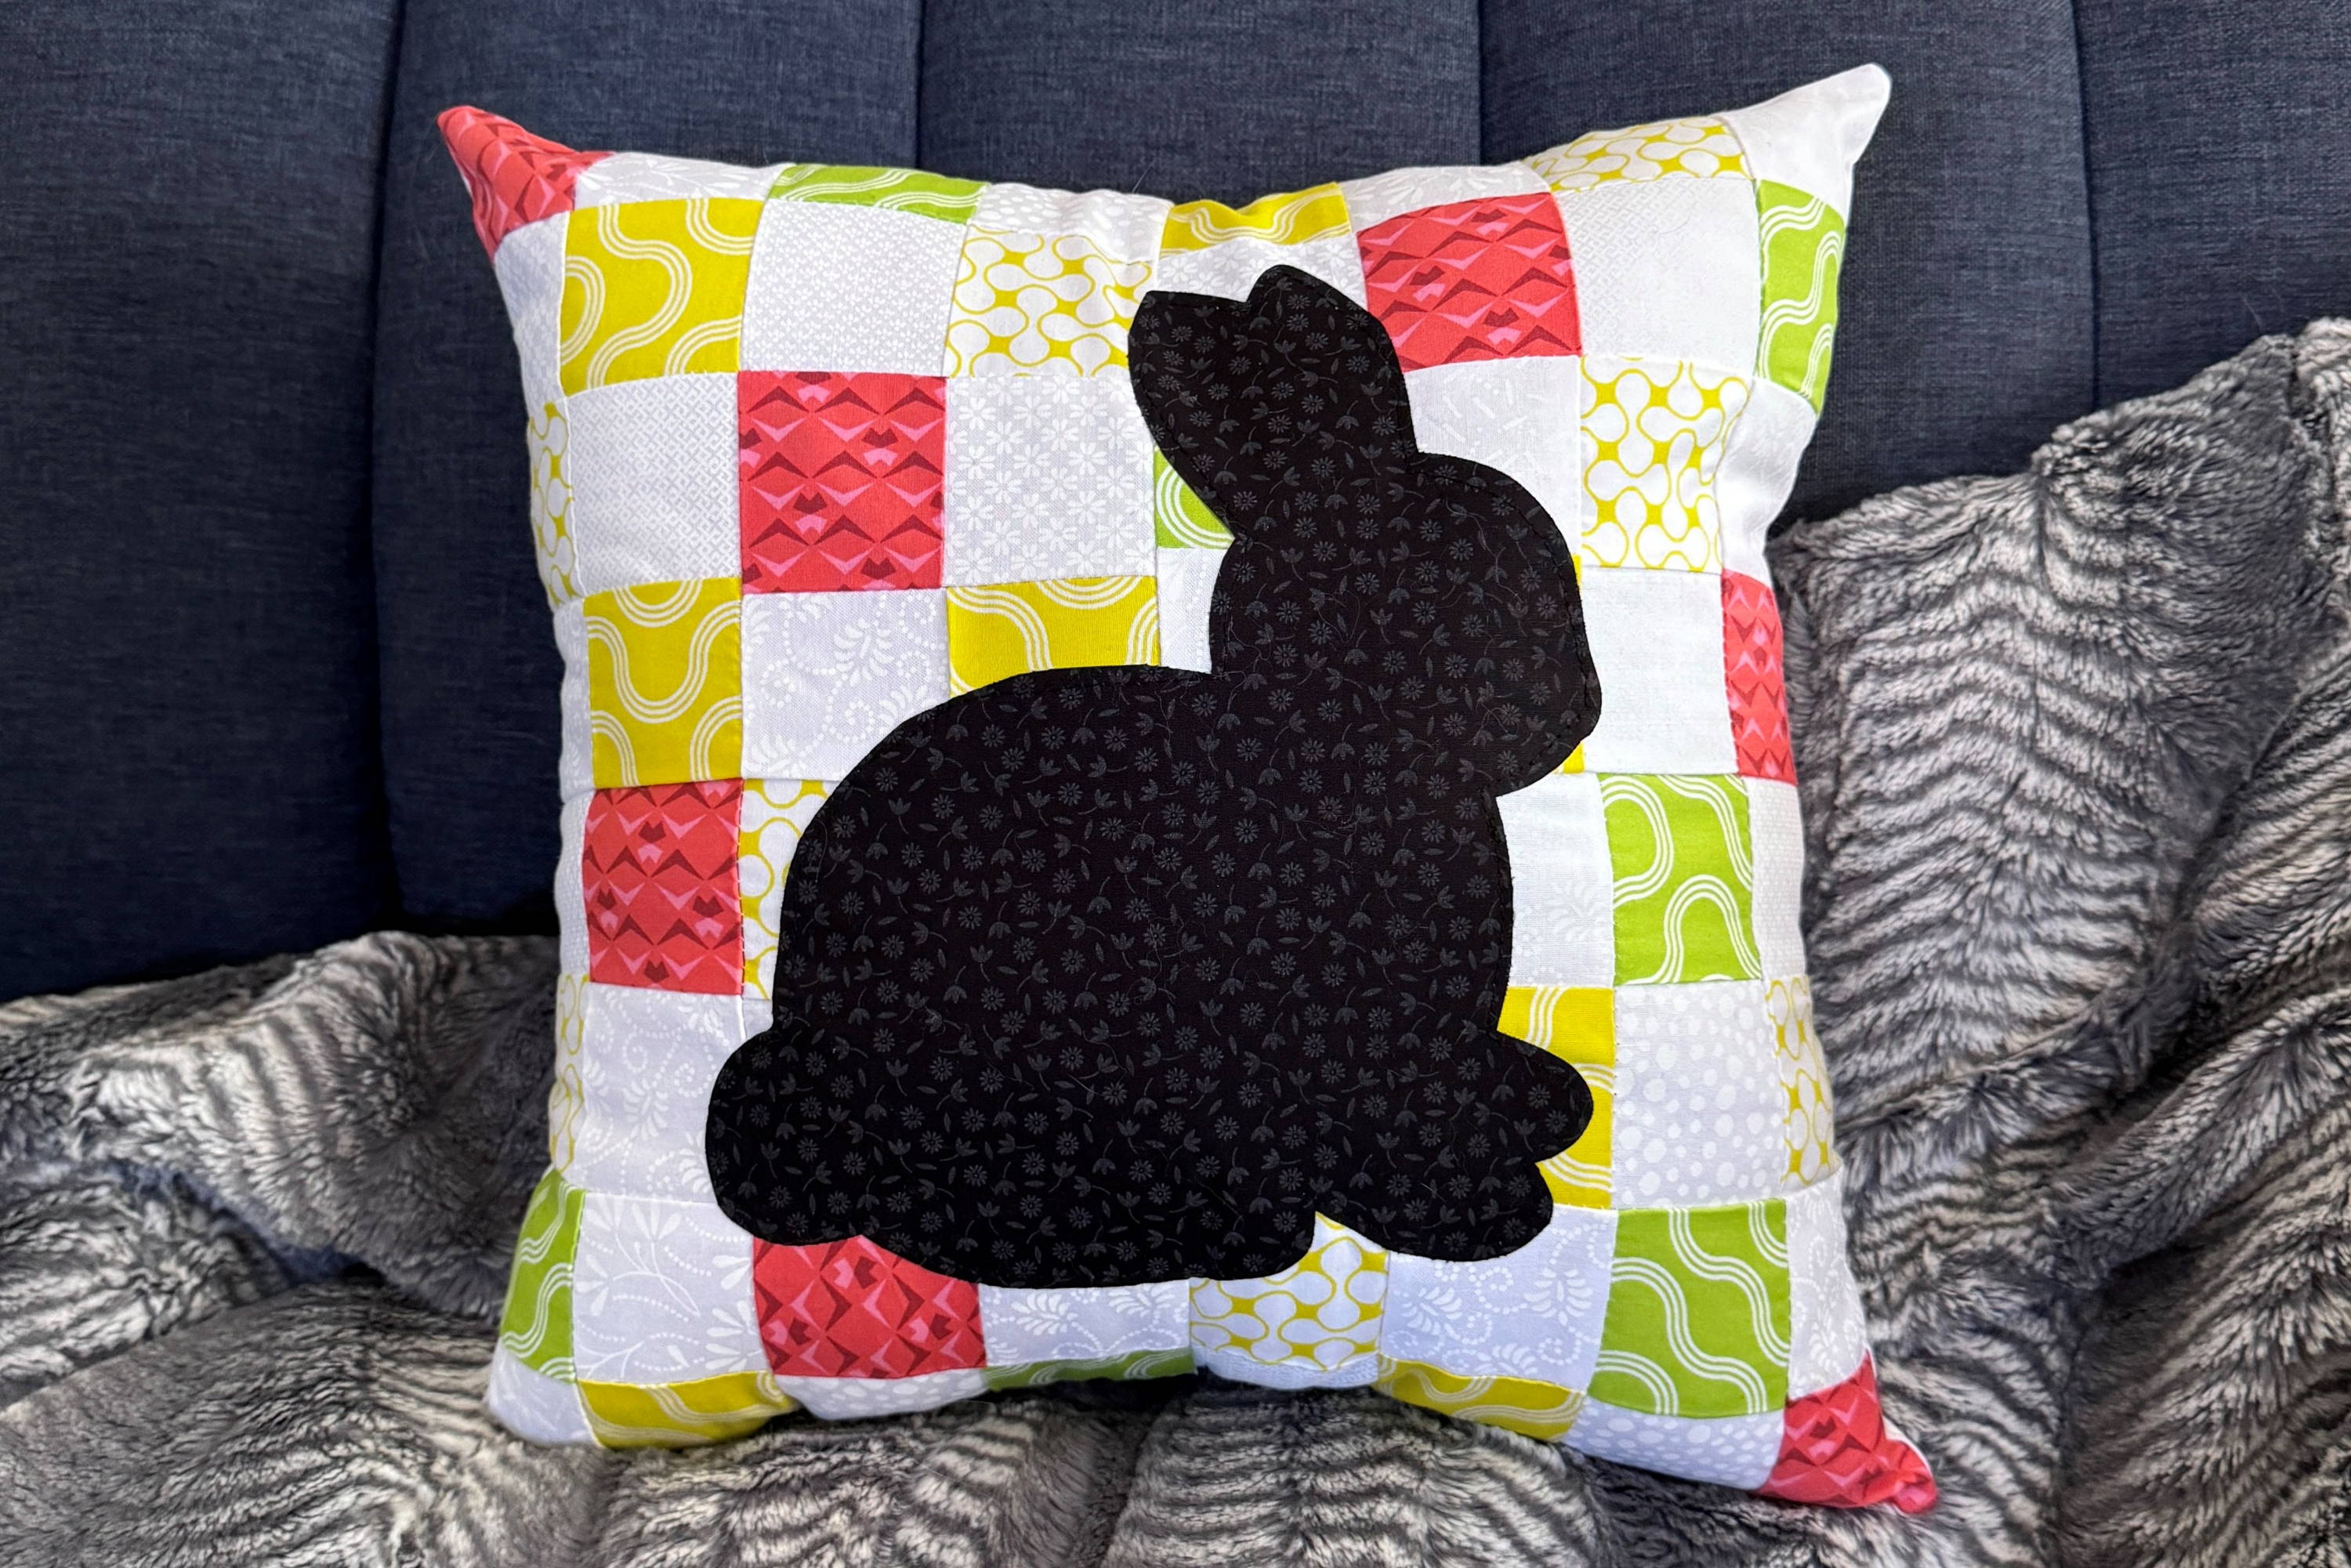 bunny template used to add shape to a diy pillow sewing project